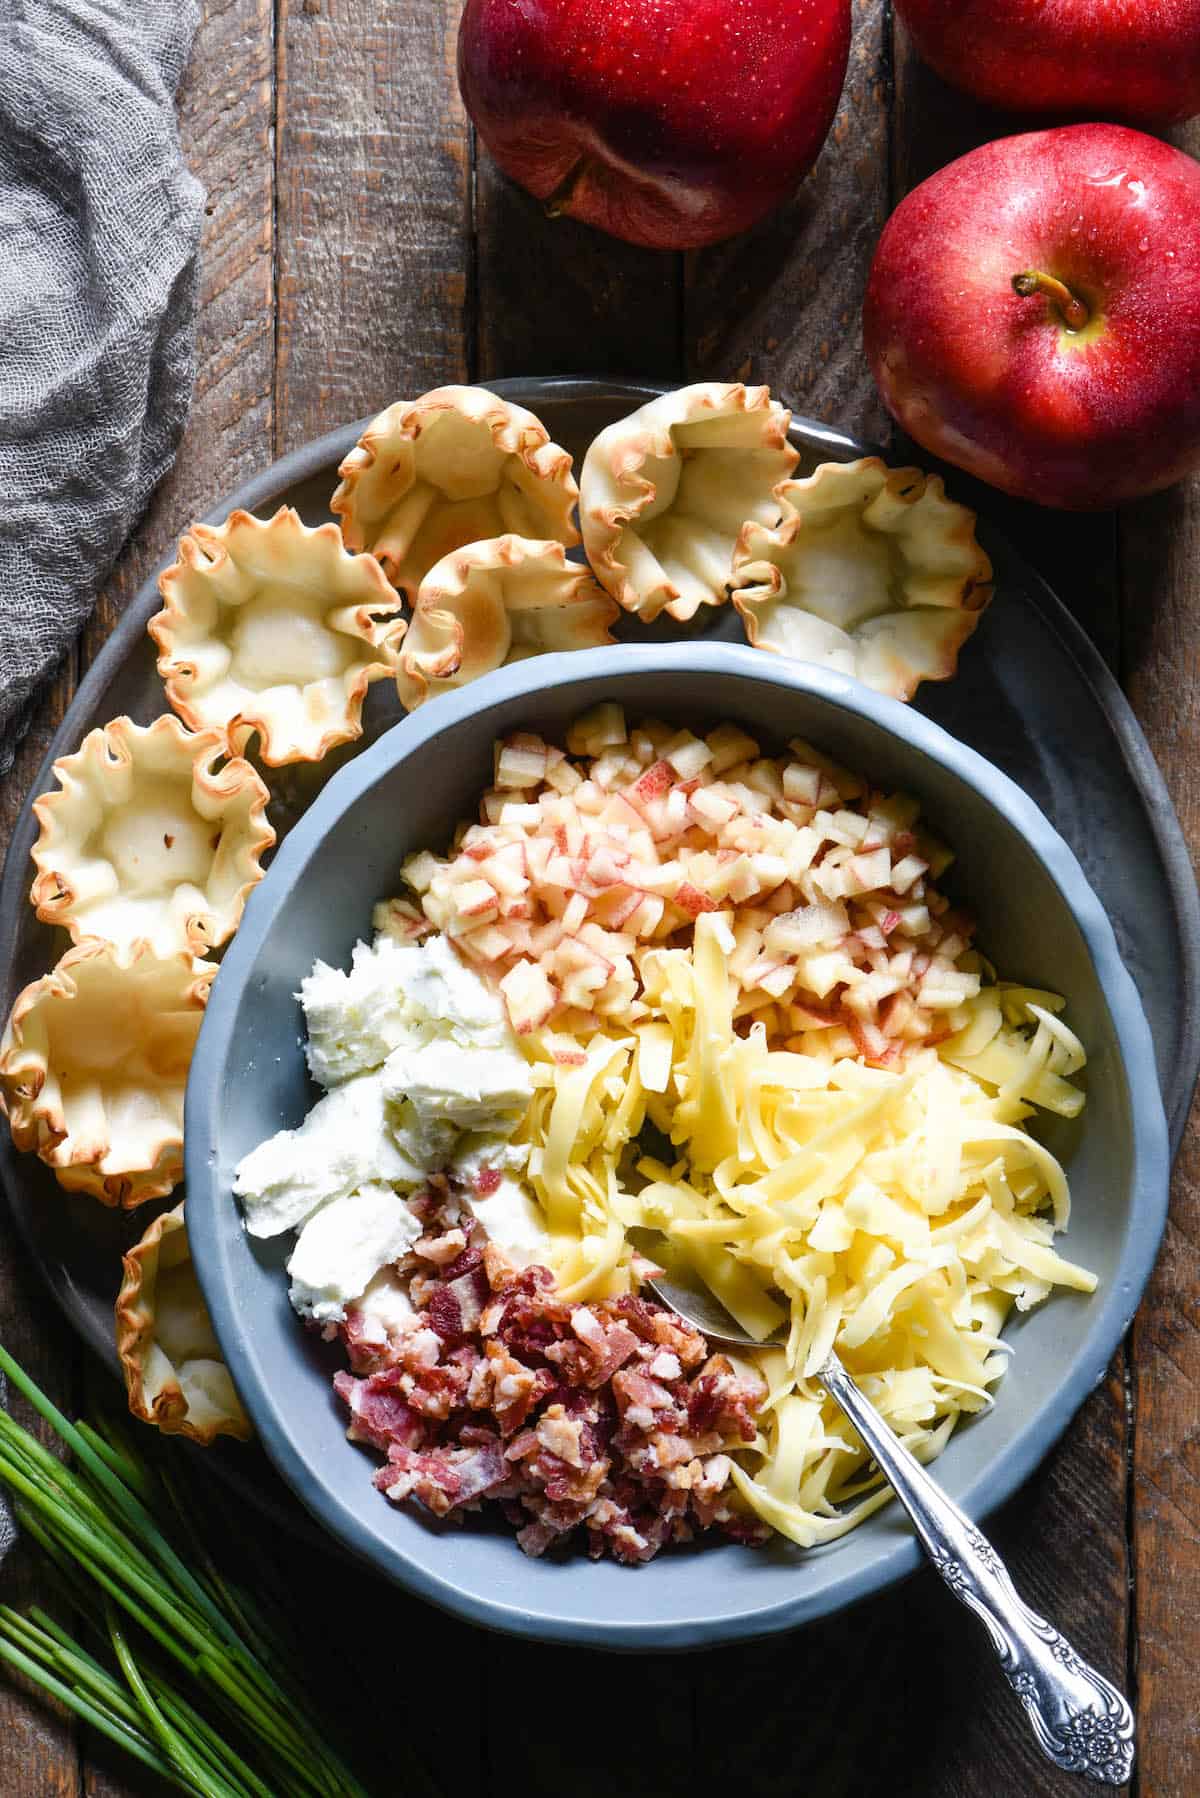 Bowl filled with bacon, goat cheese, light yellow shredded cheese and chopped apples, with empty phyllo cups nearby.